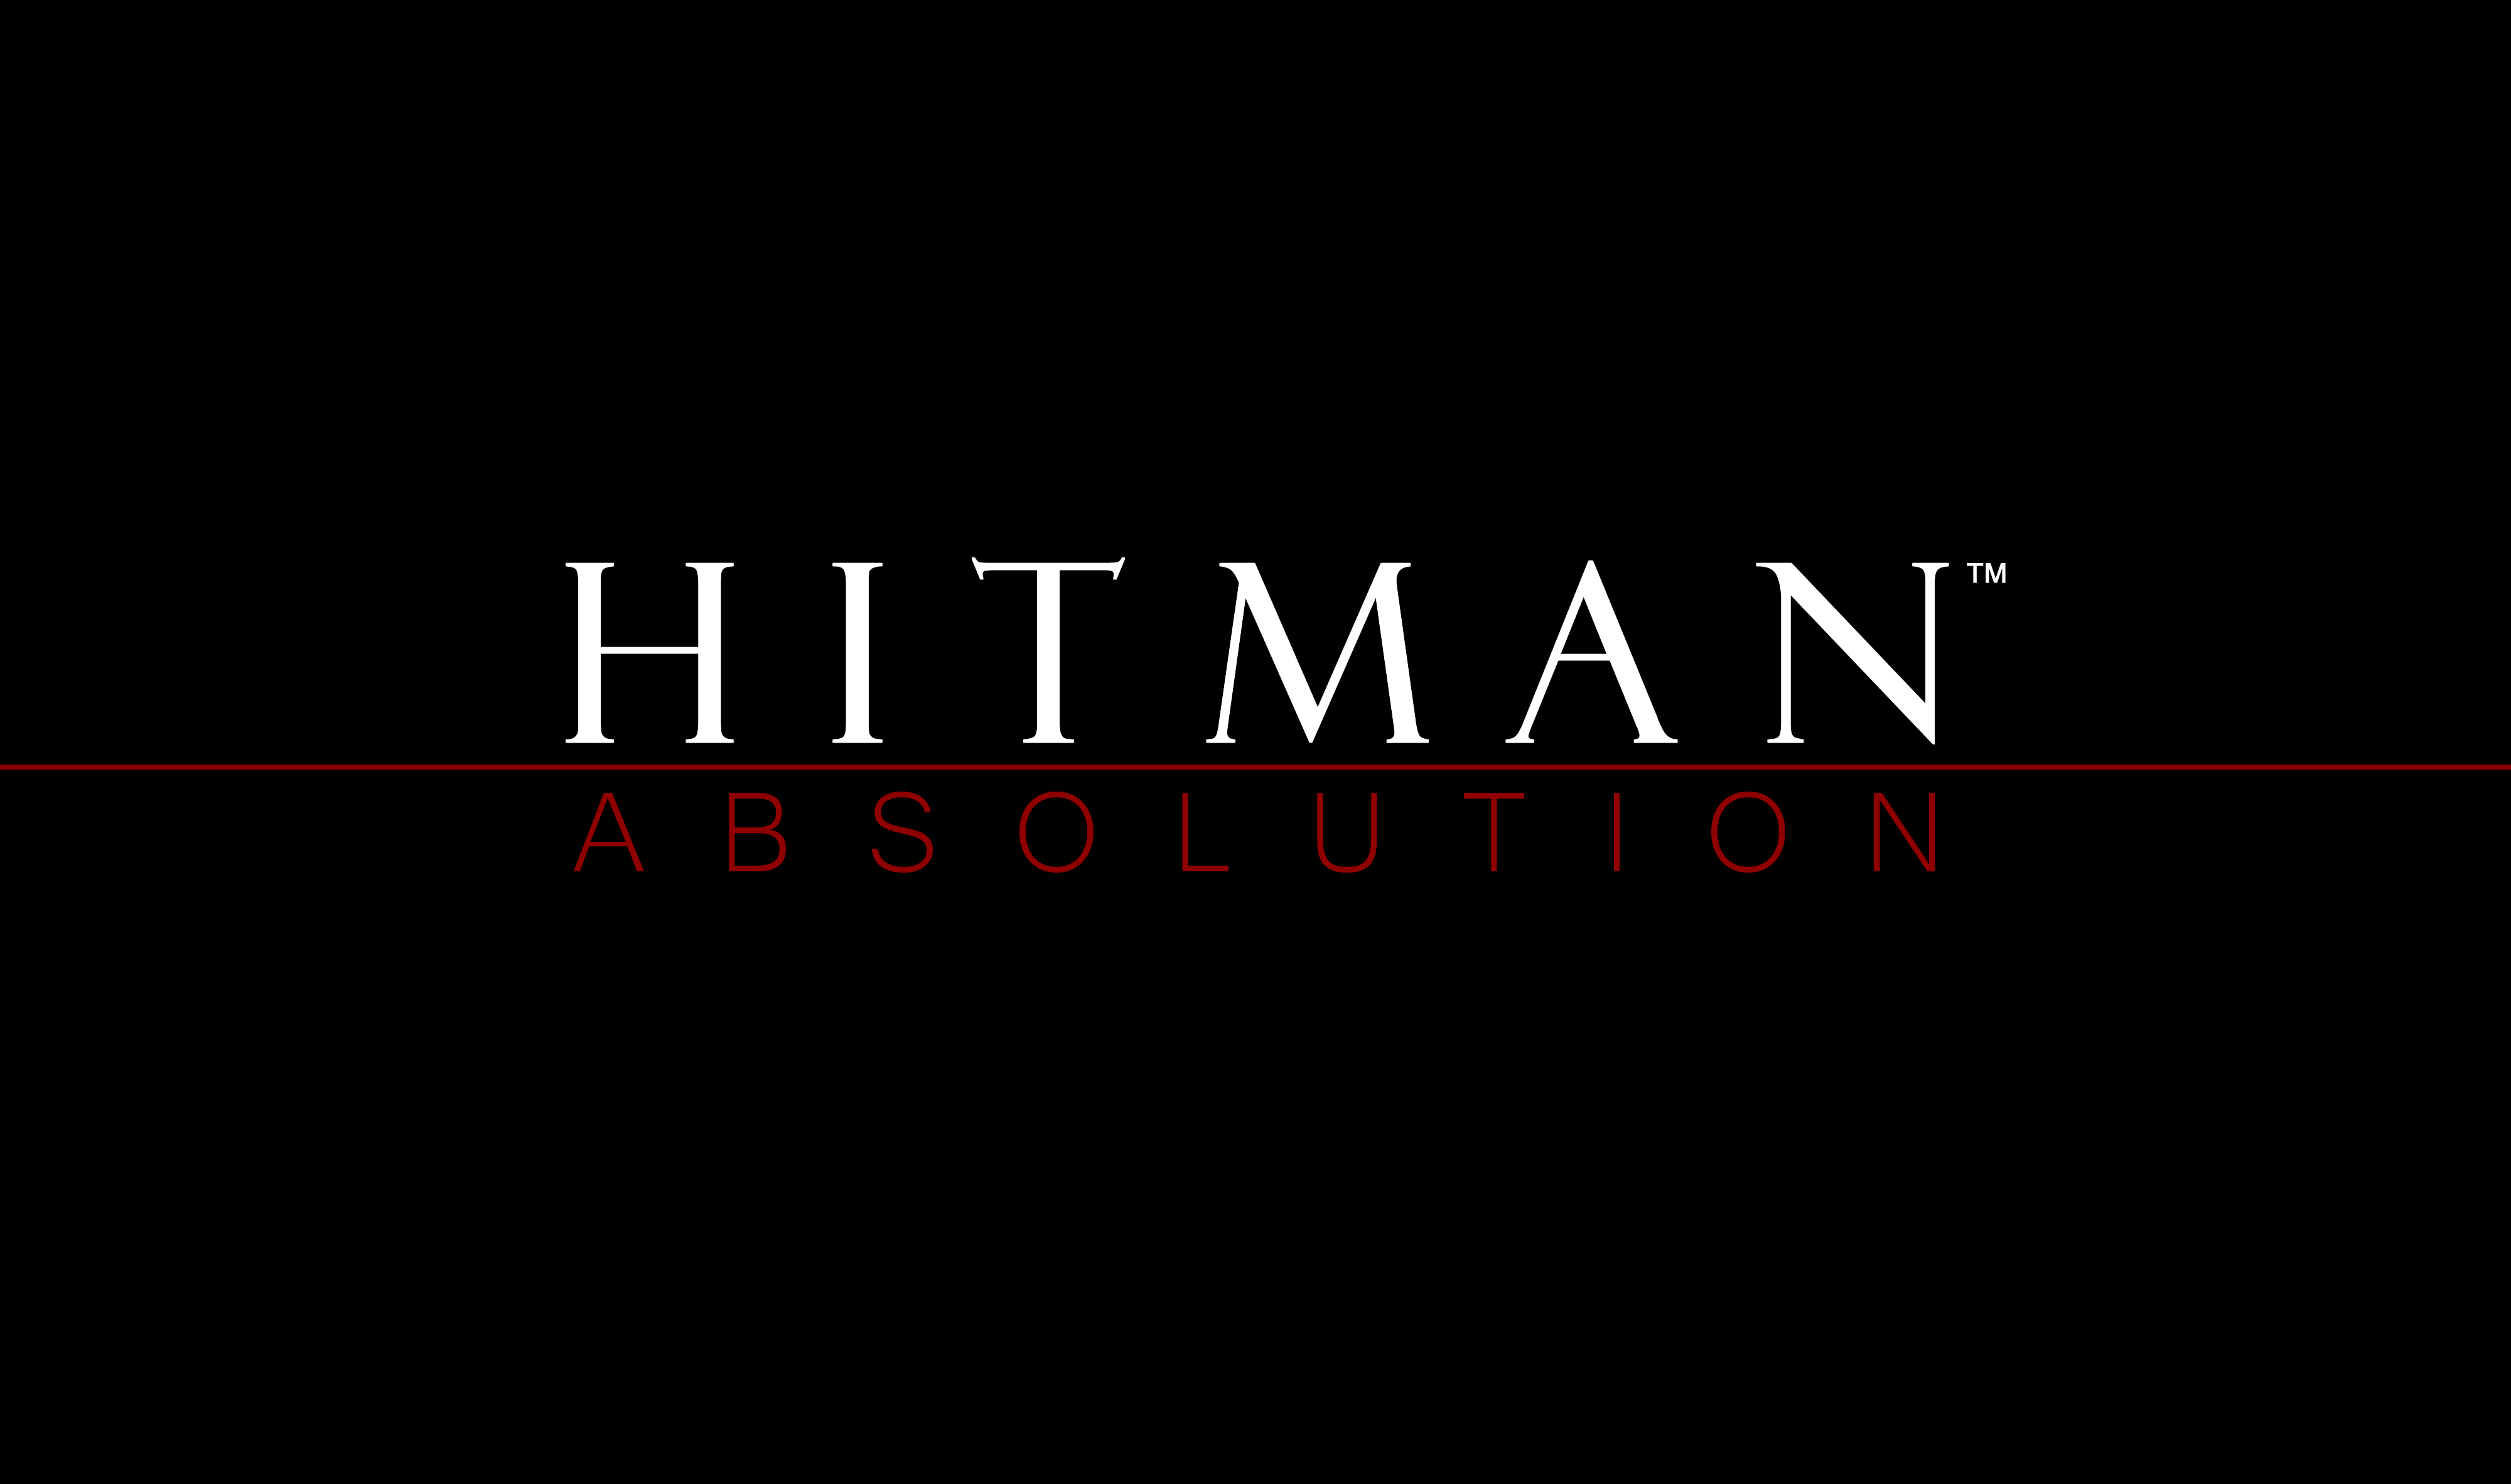 Hitman: Absolution “Behind The Scenes” Video Released